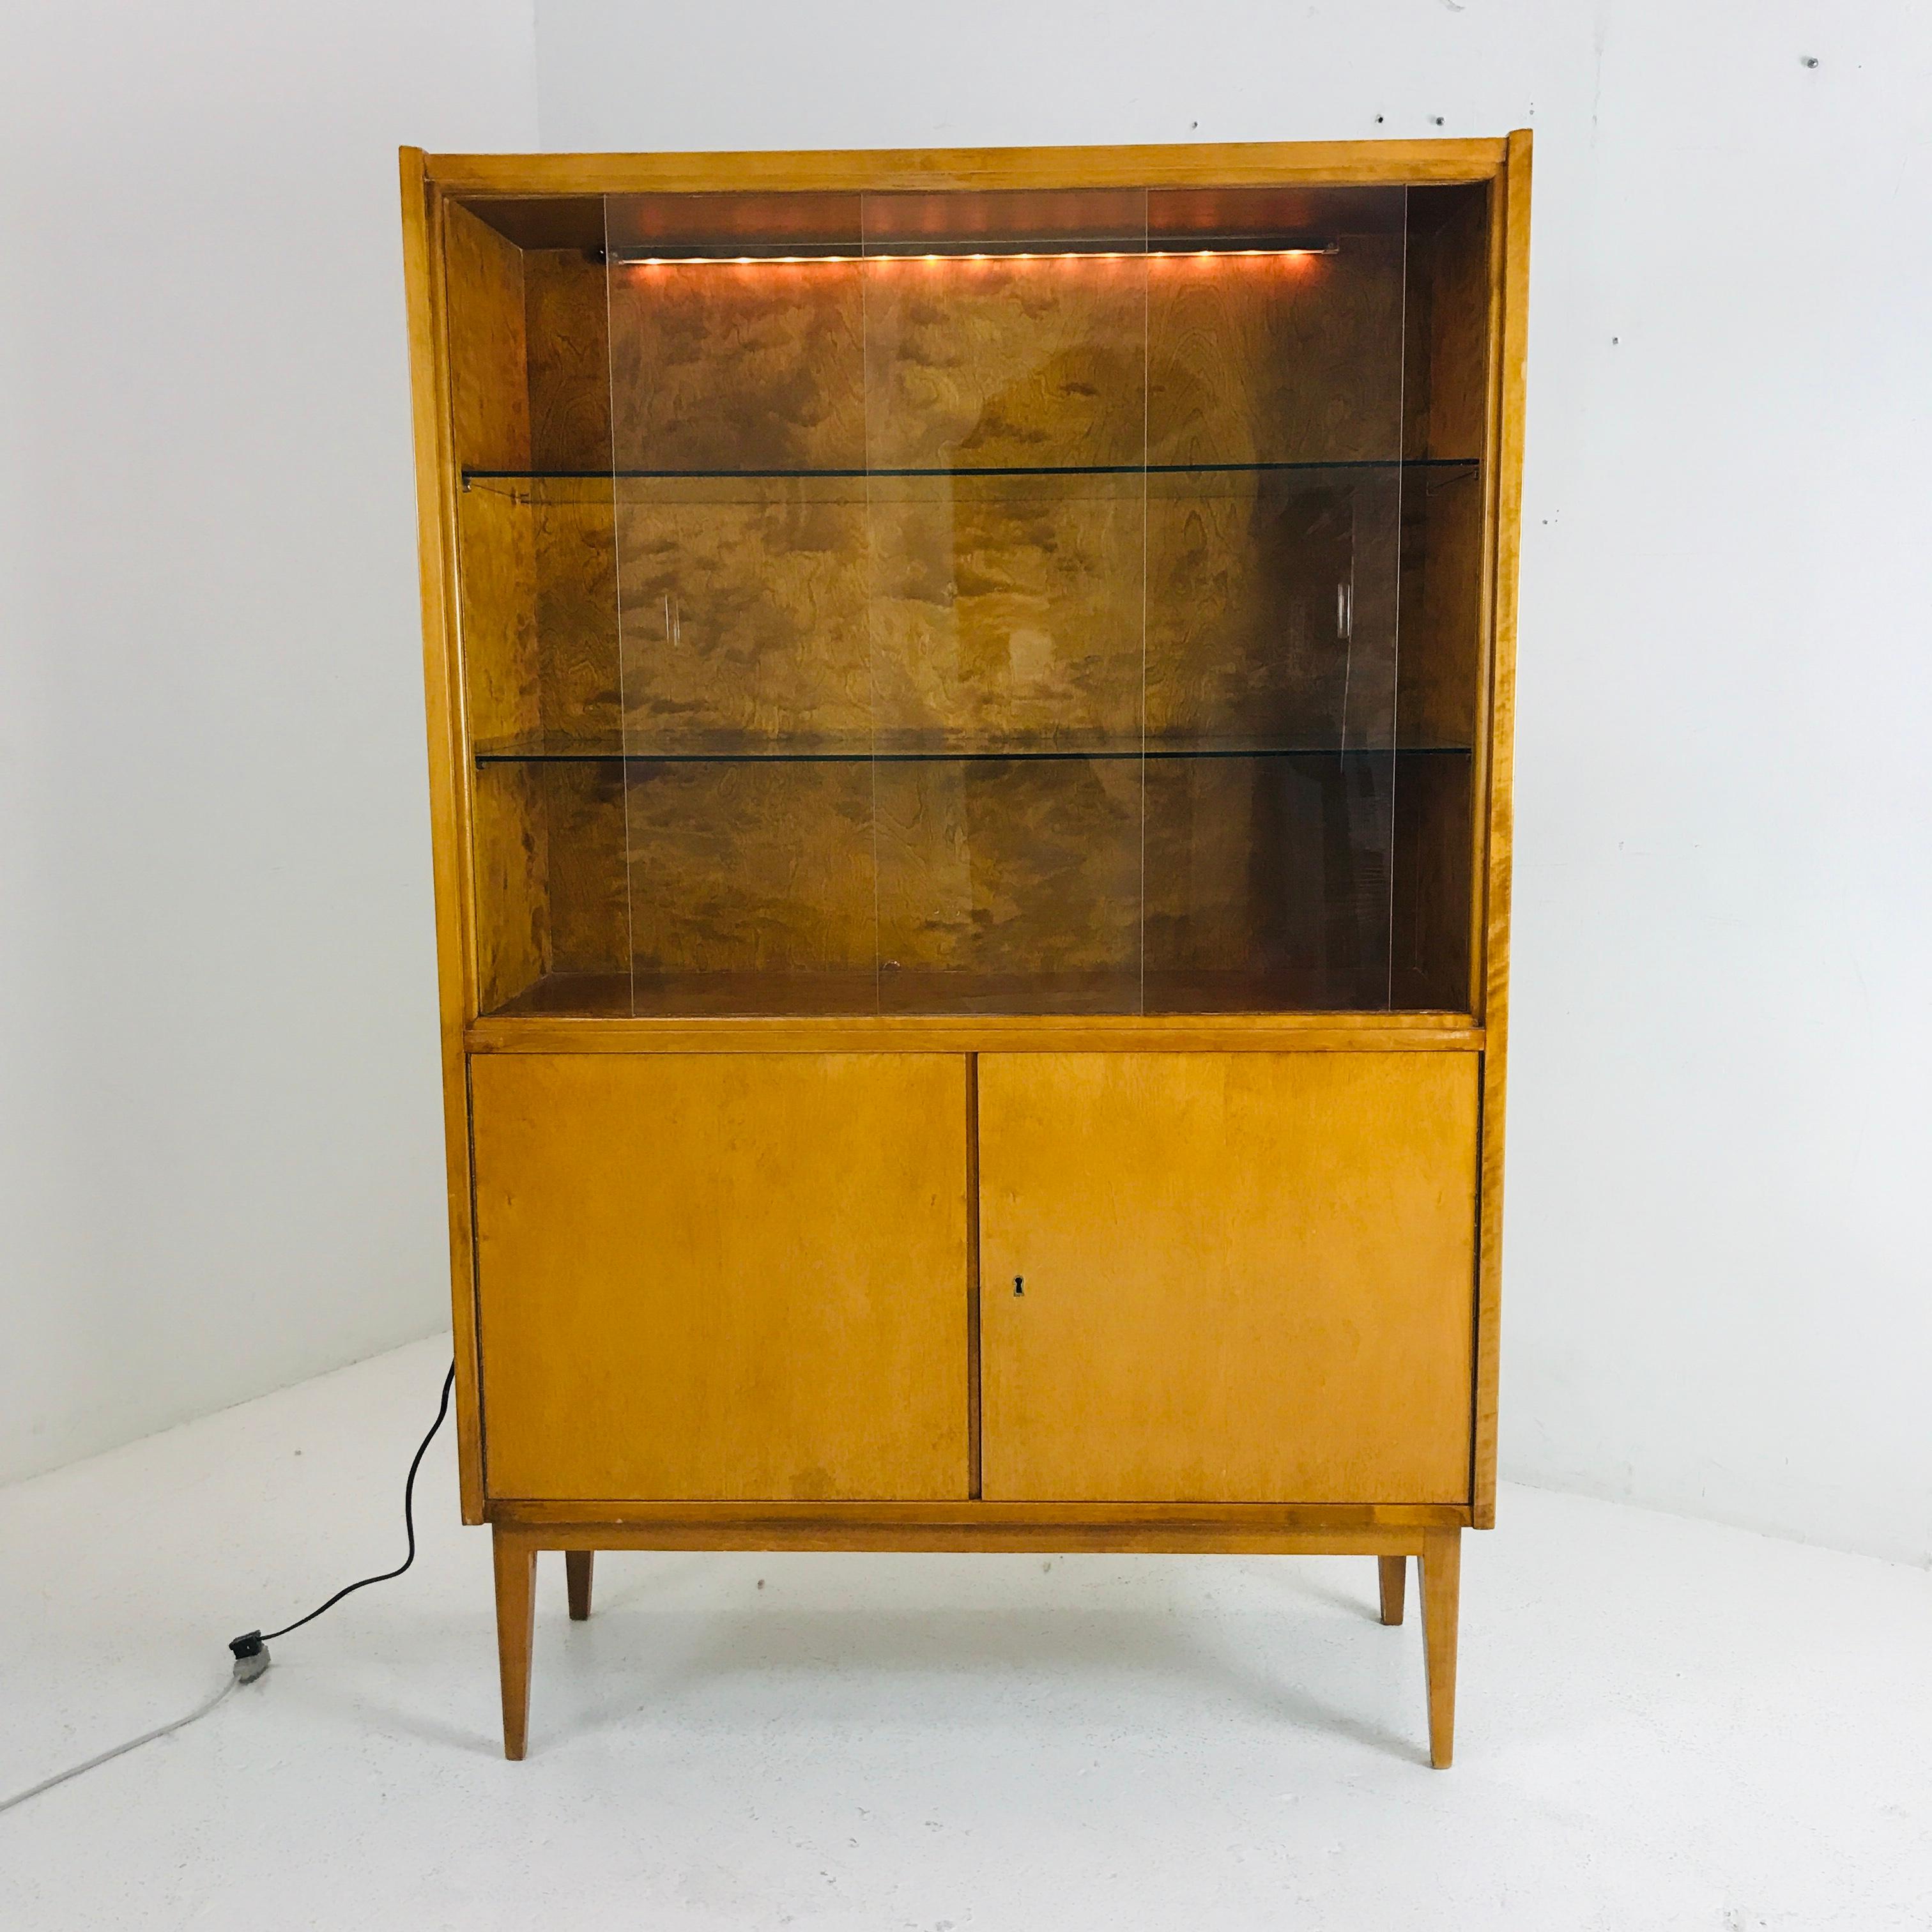 1950s French display cabinet with glass shelves.